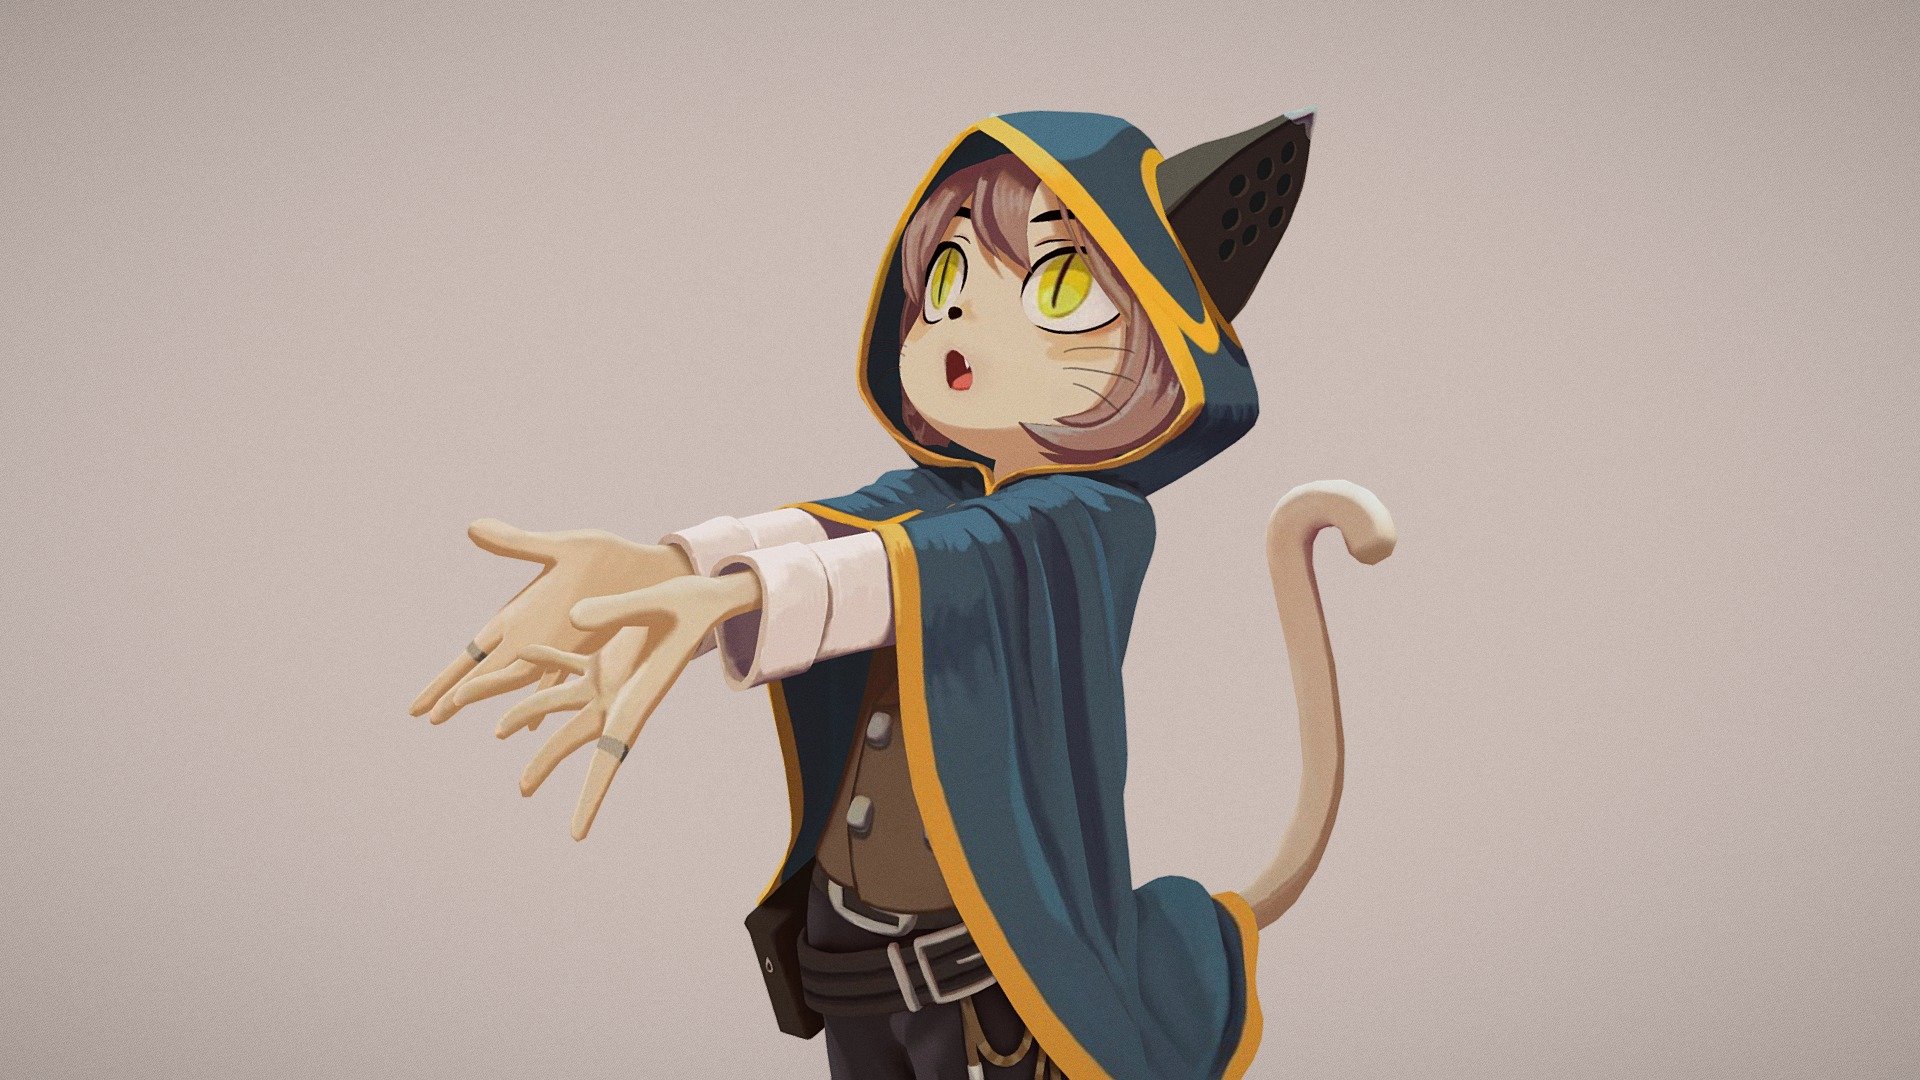 Here's a model I made from a concept by Kunitarou. Please check out their Twitter: @kunitarouart 3d model